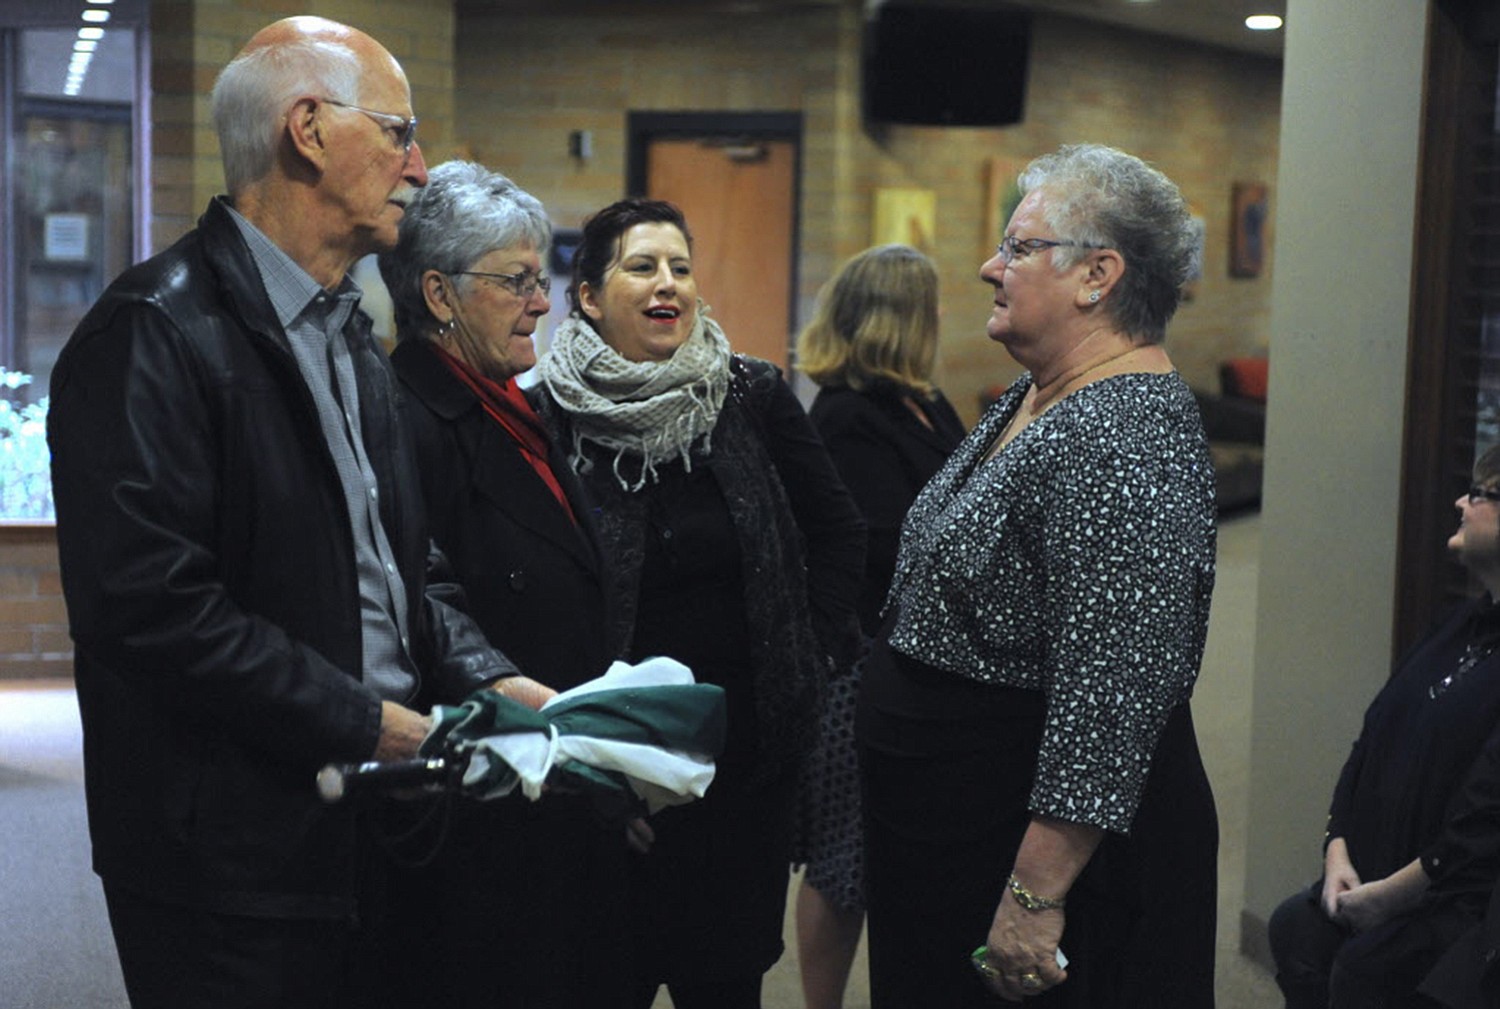 Friends and family gather around Sherry Van Cleve, right, at a memorial service for her husband, Bud Van Cleve, at the Vancouver First Church of God.